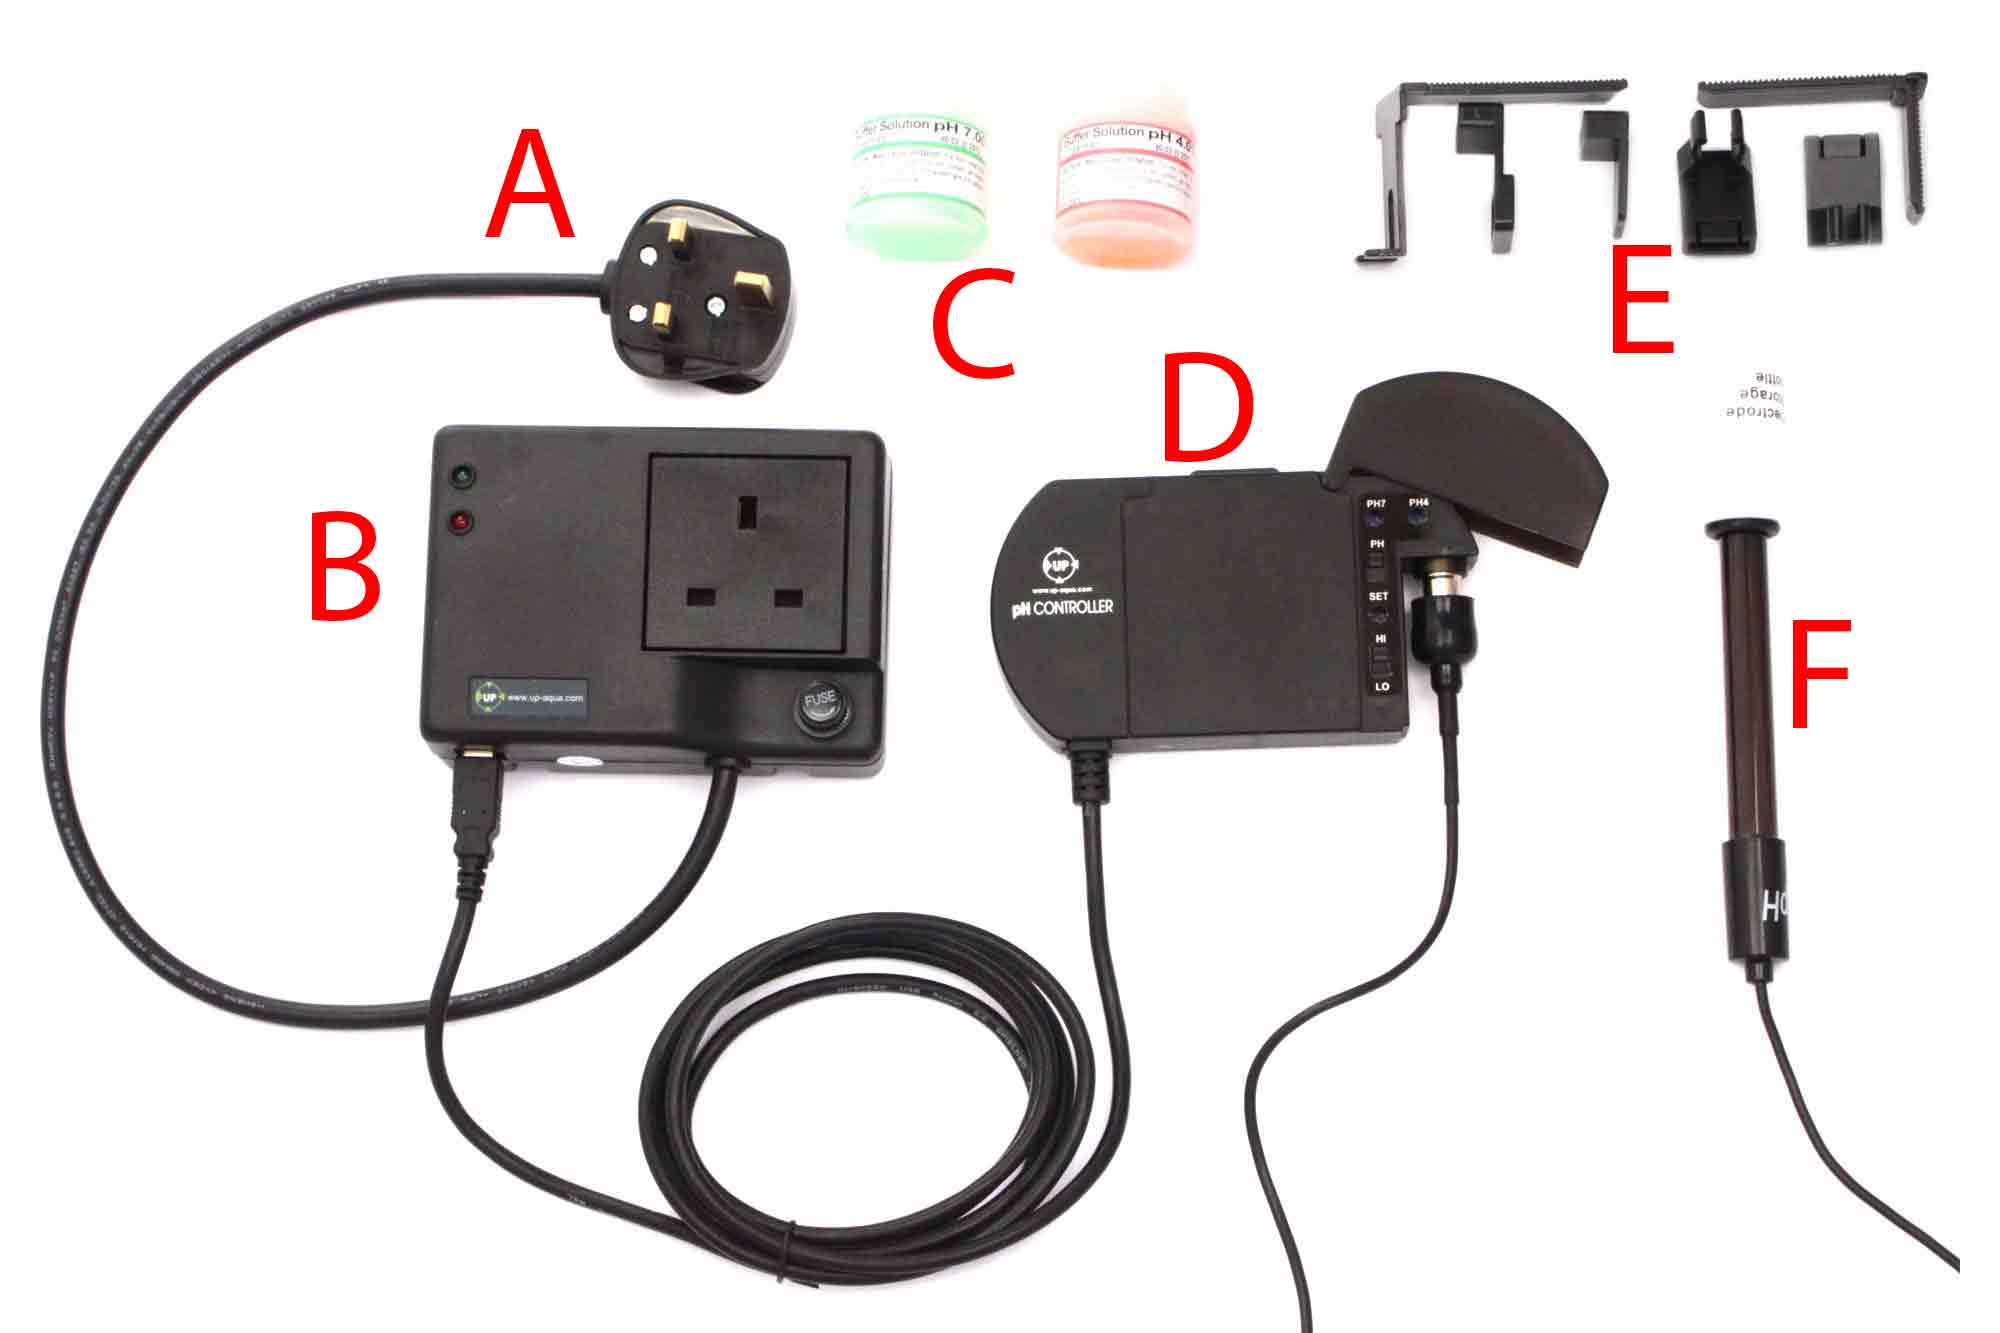 All components of the UP Precision pH Controller